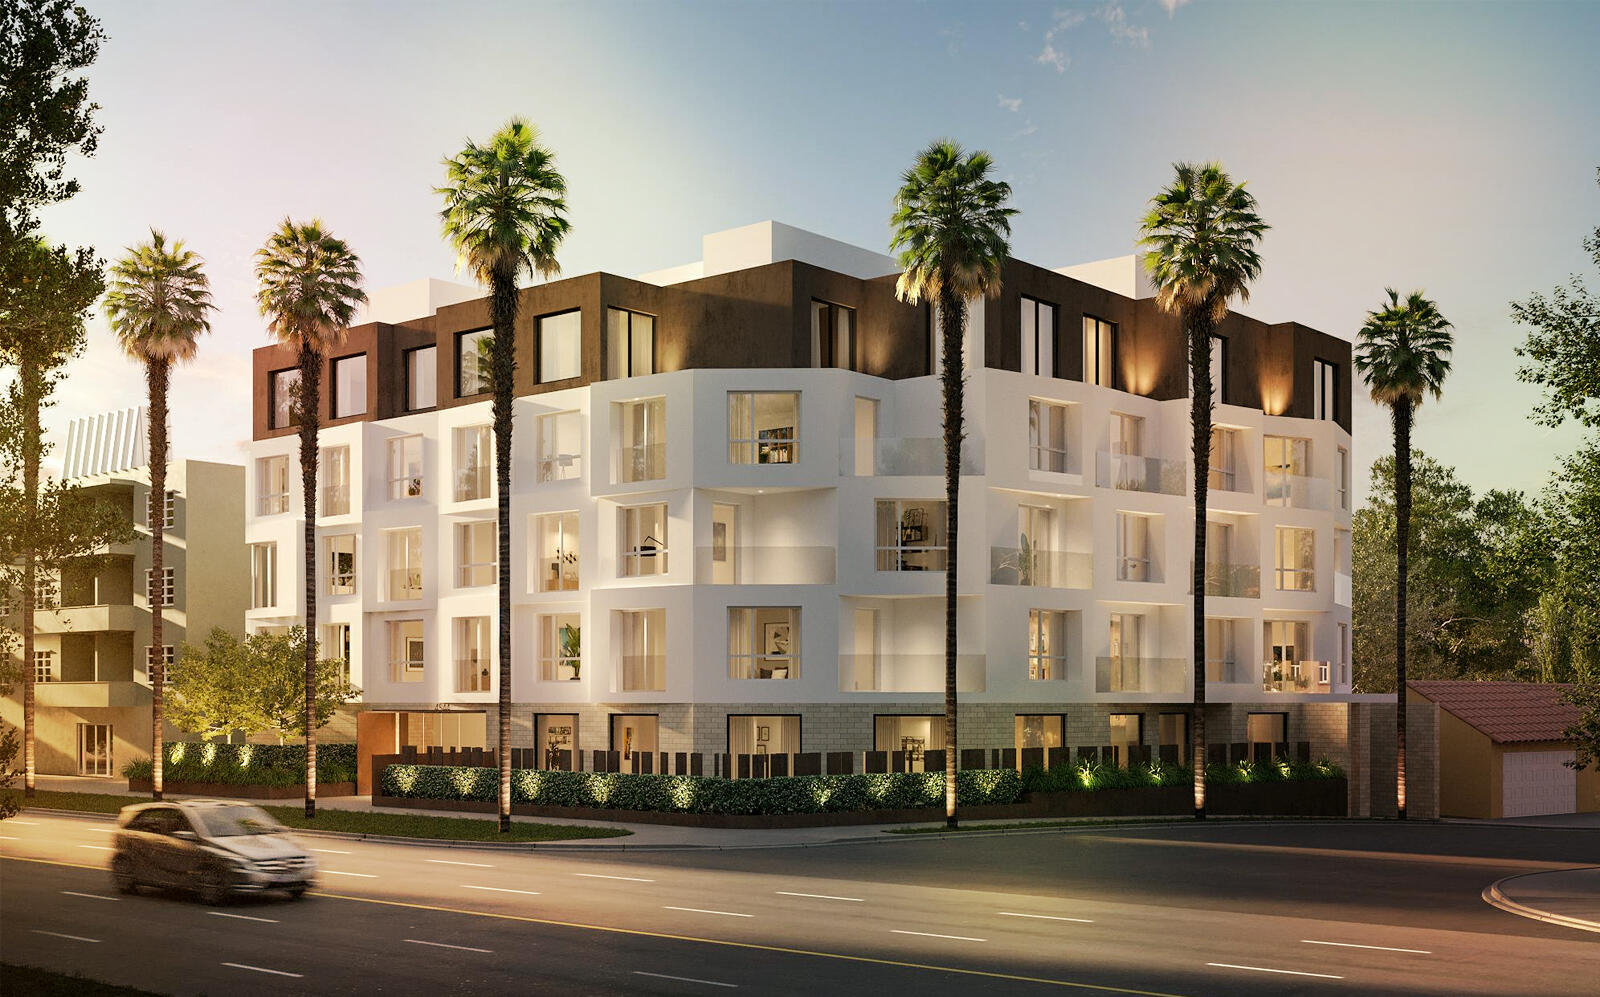 Renderings of the project (Los Angeles City Planning)